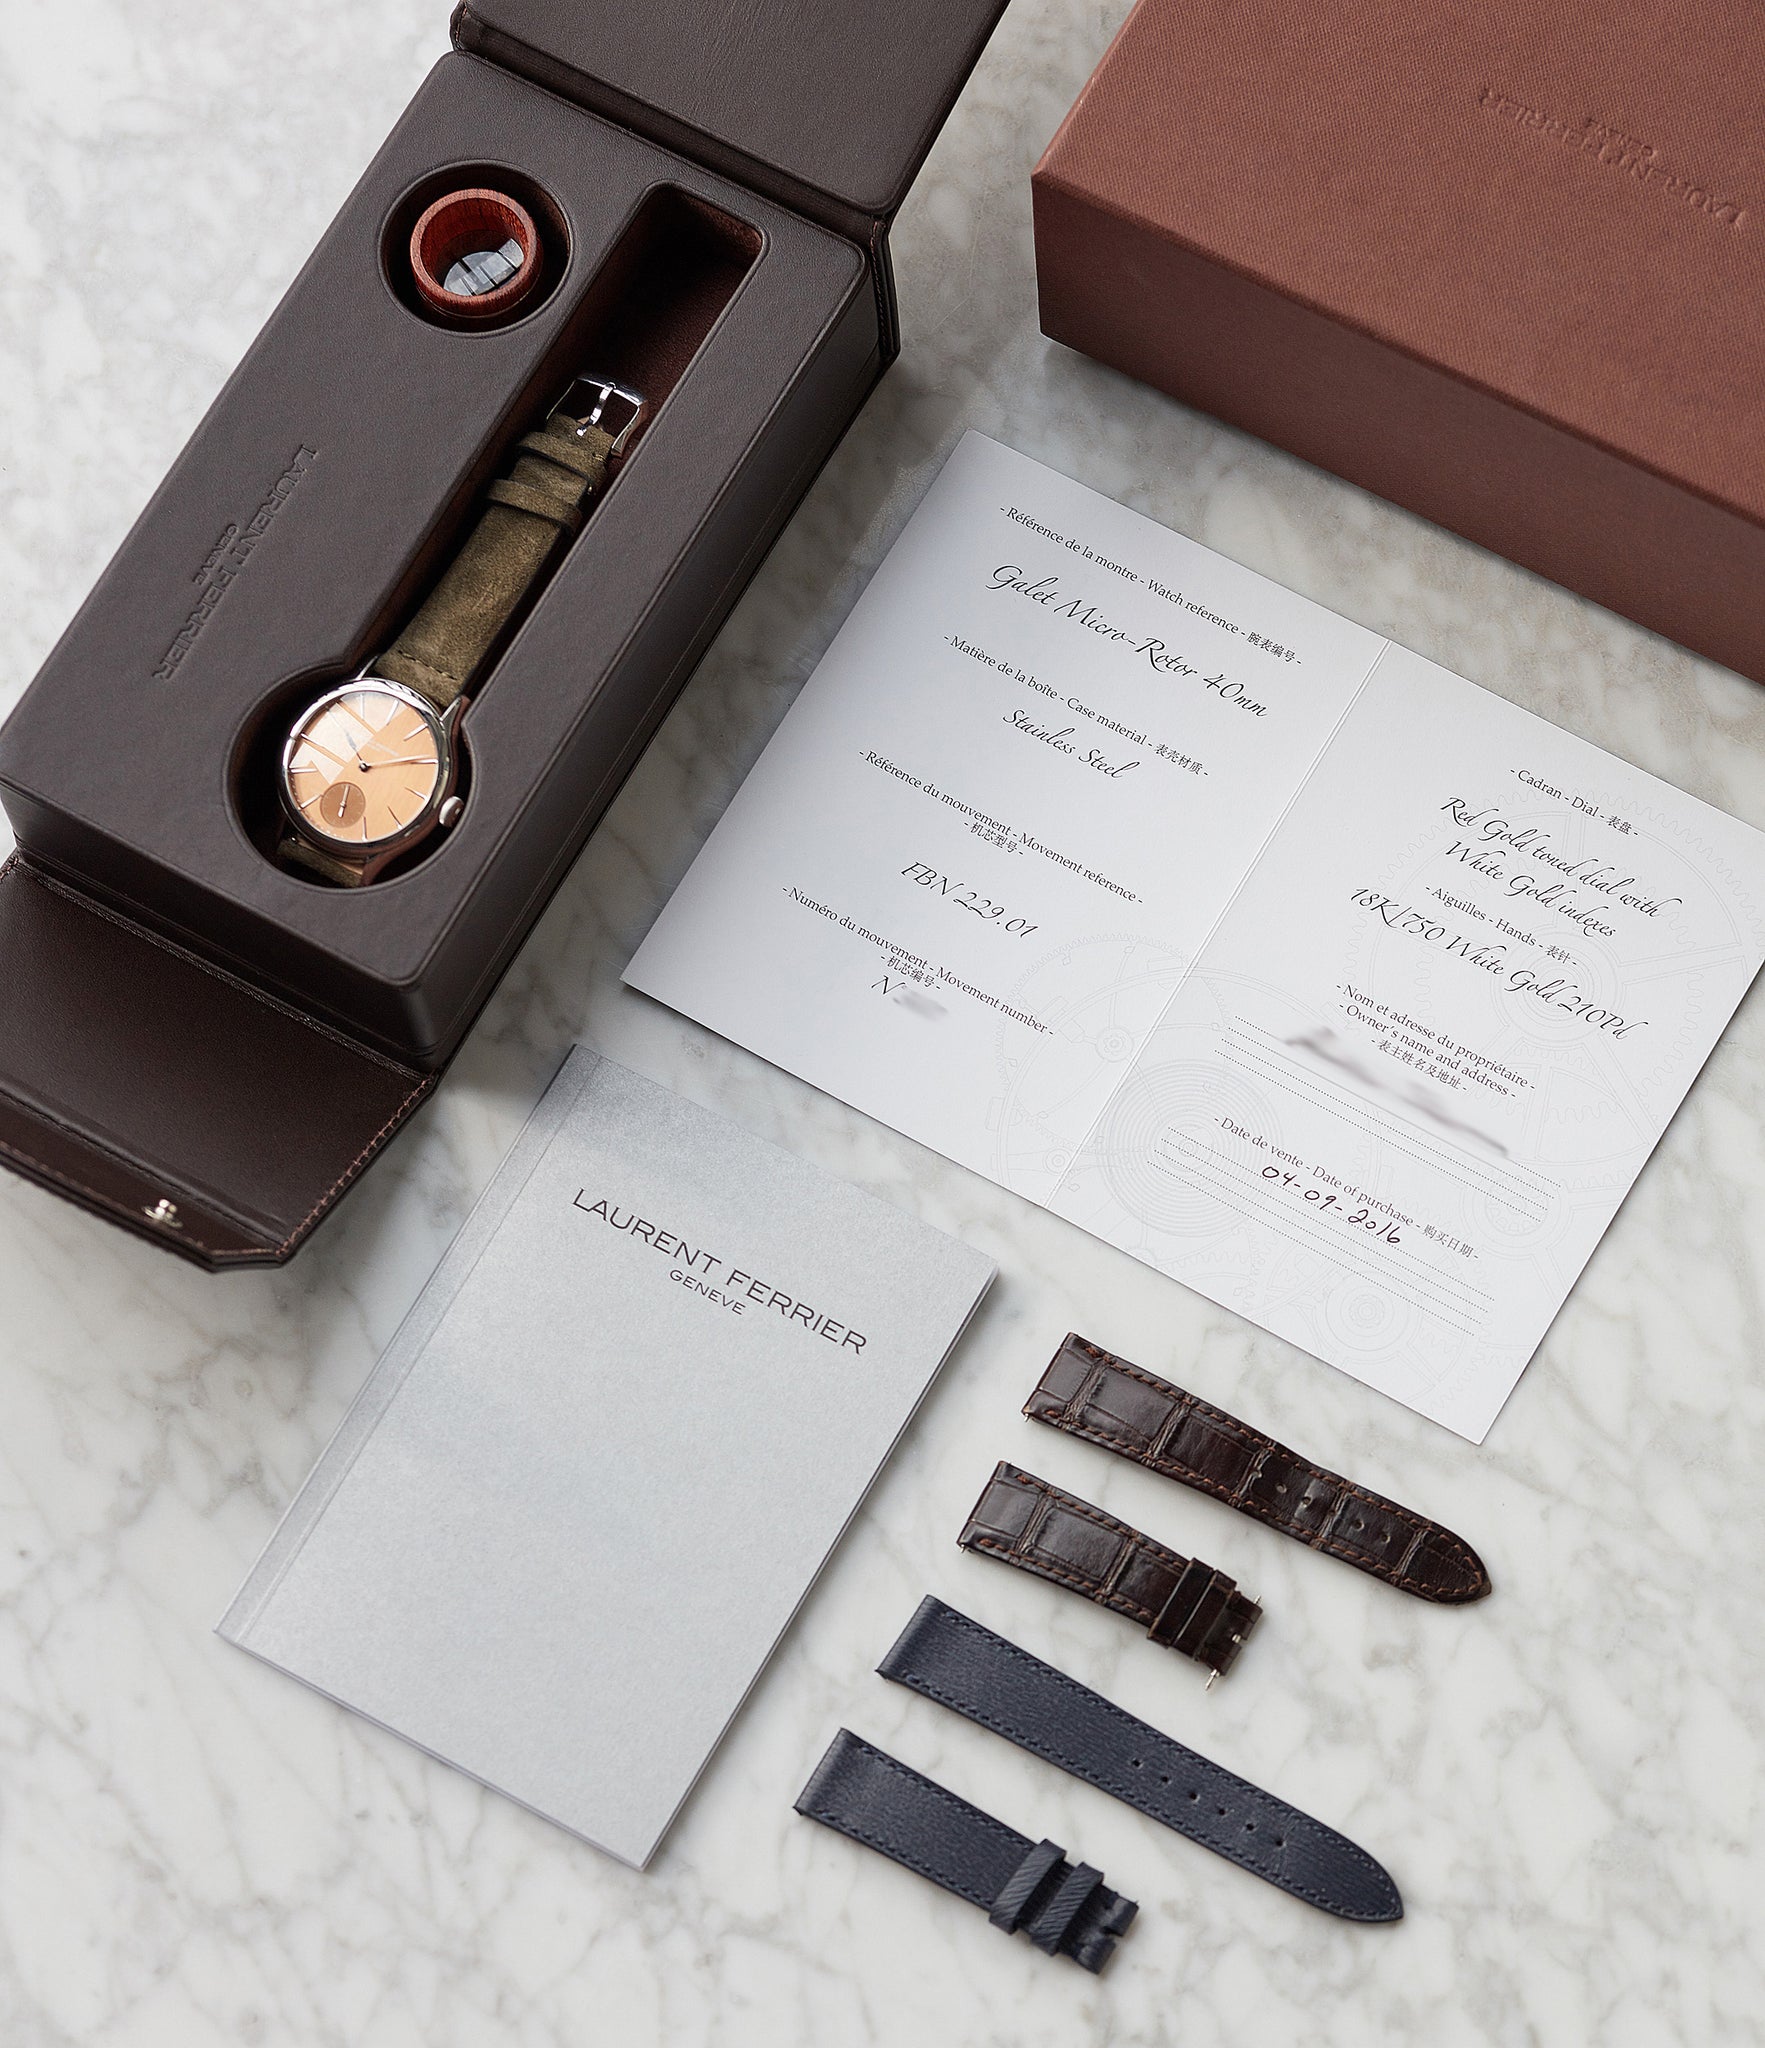 full set pre-owned Laurent Ferrier Galet Micro-rotor FBN 229.01 steel rare watch with pink salmon red gold dial for sale online at A Collected Man London approved re-seller of independent watchmakers